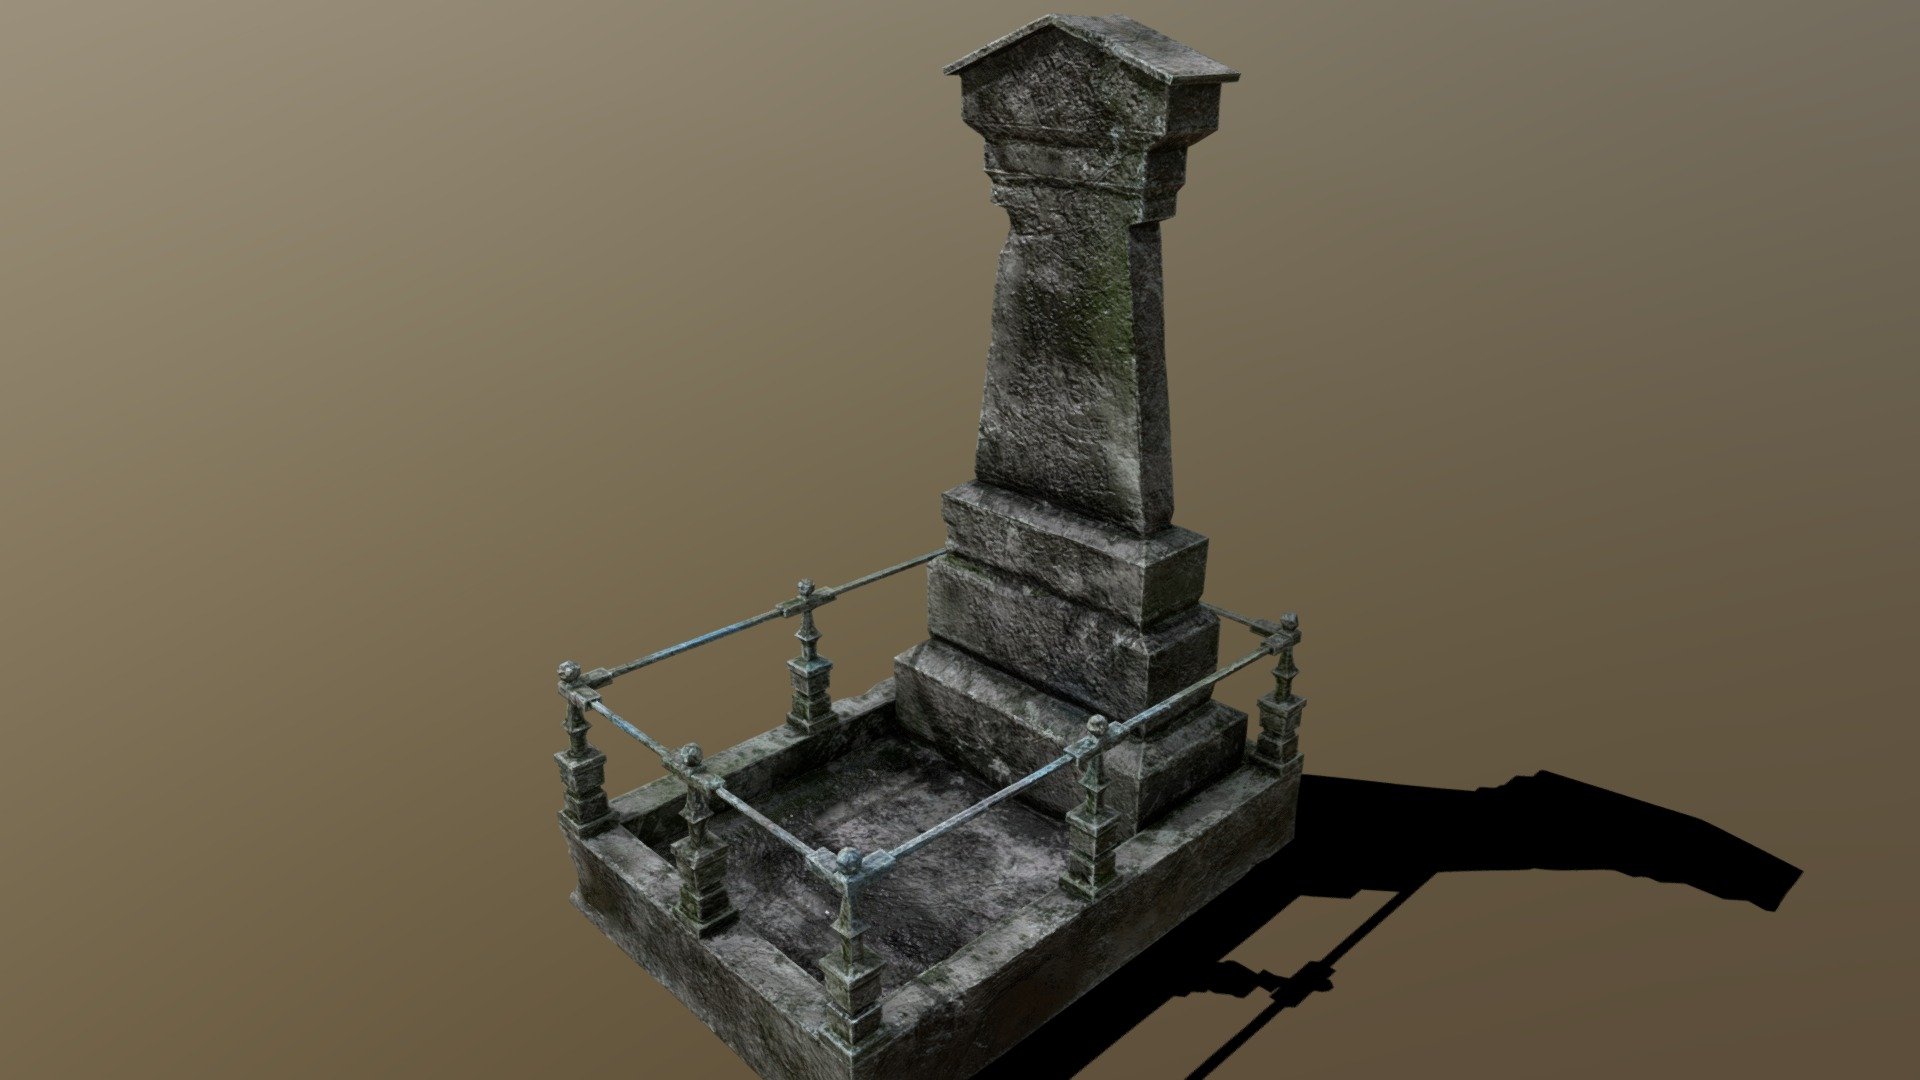 FBX Model
2K Textures
Low Poly - Tombstone (Game Ready) - 3D model by Sculpting Tools (@InterFox) 3d model